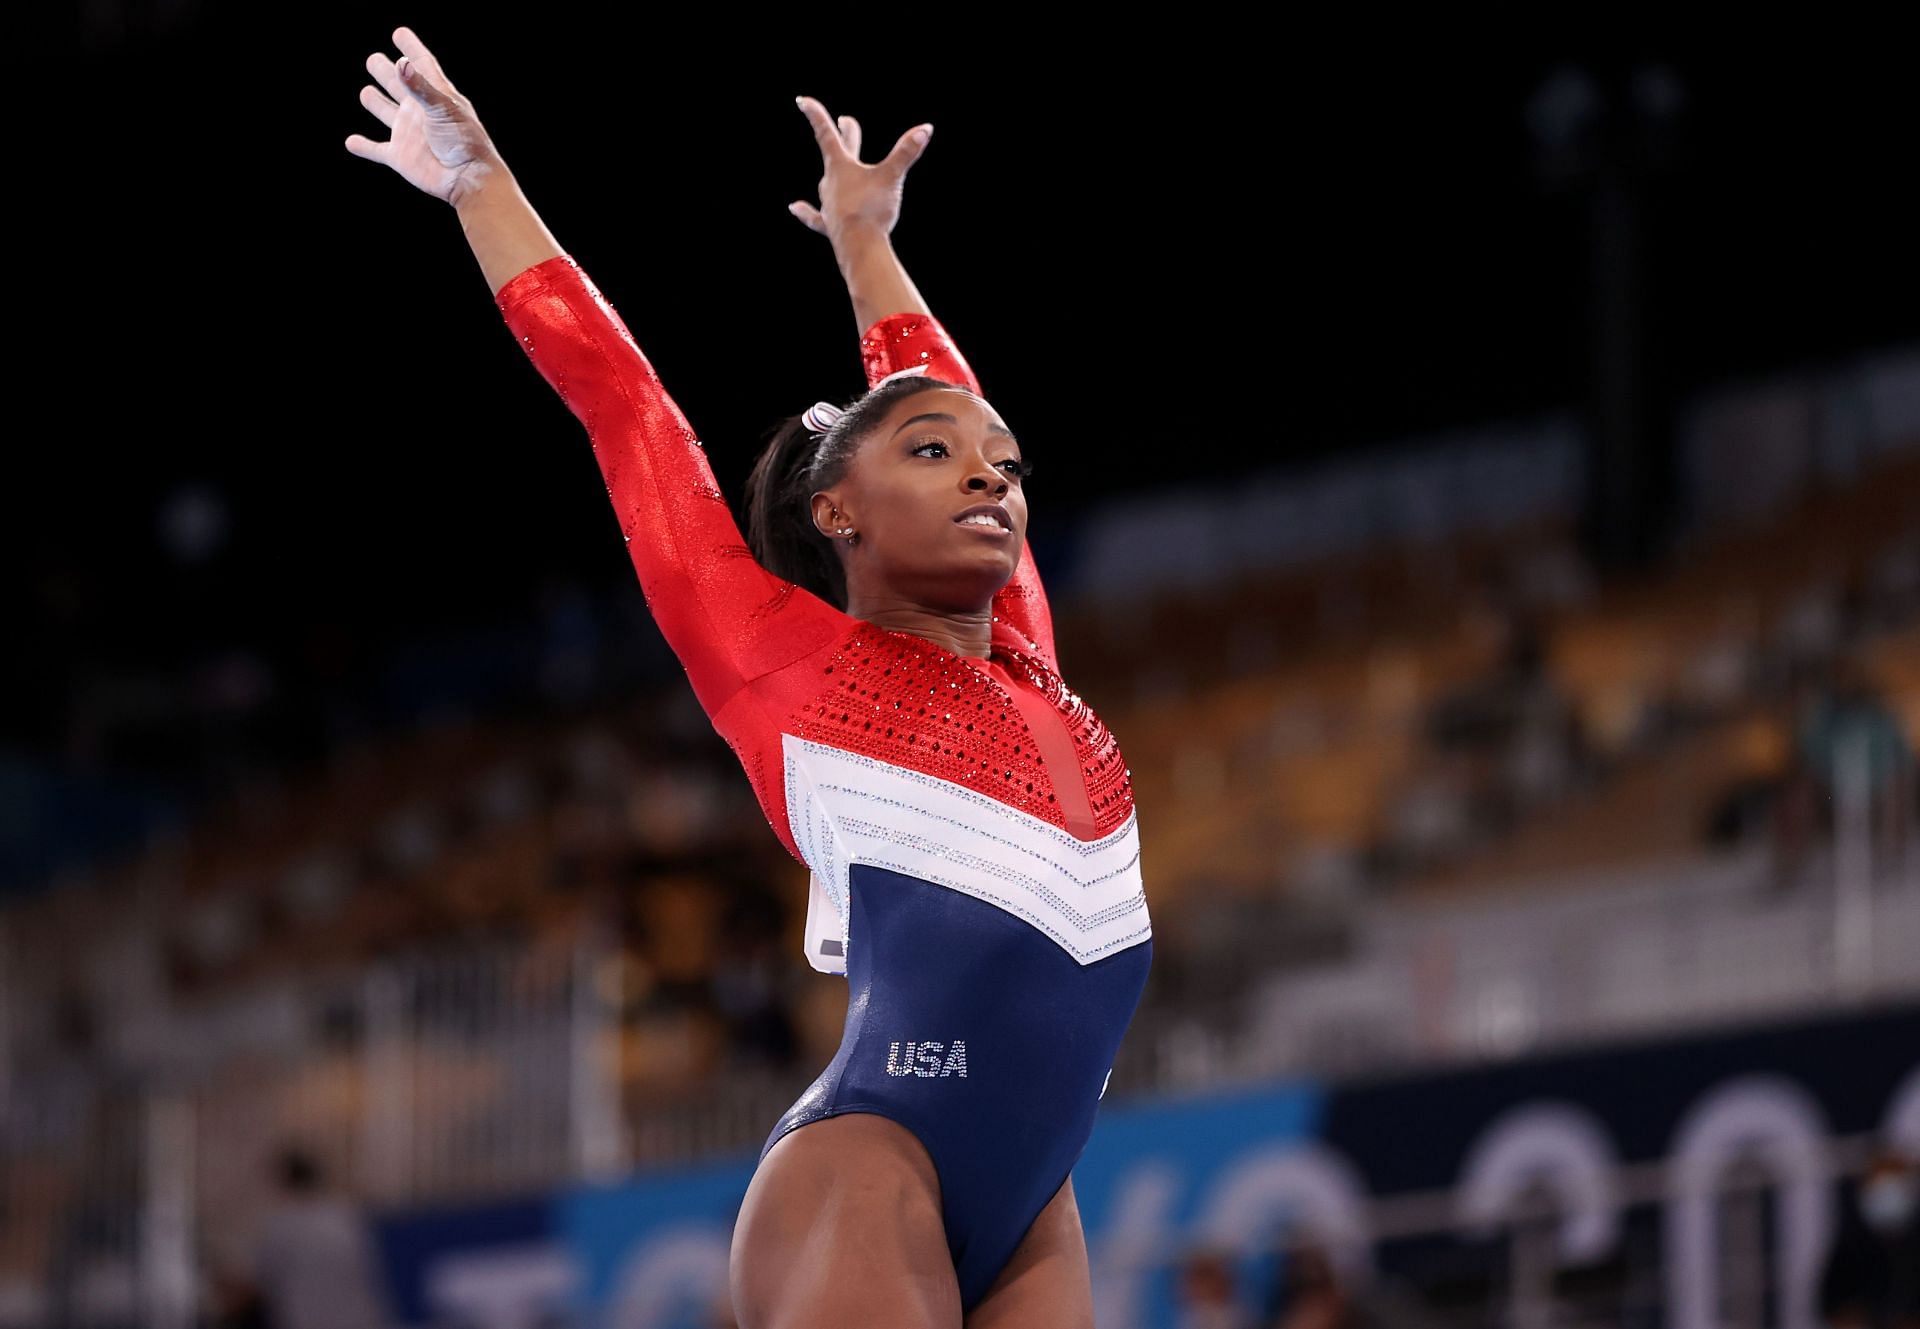 Biles into the vaults at the Tokyo Olympics